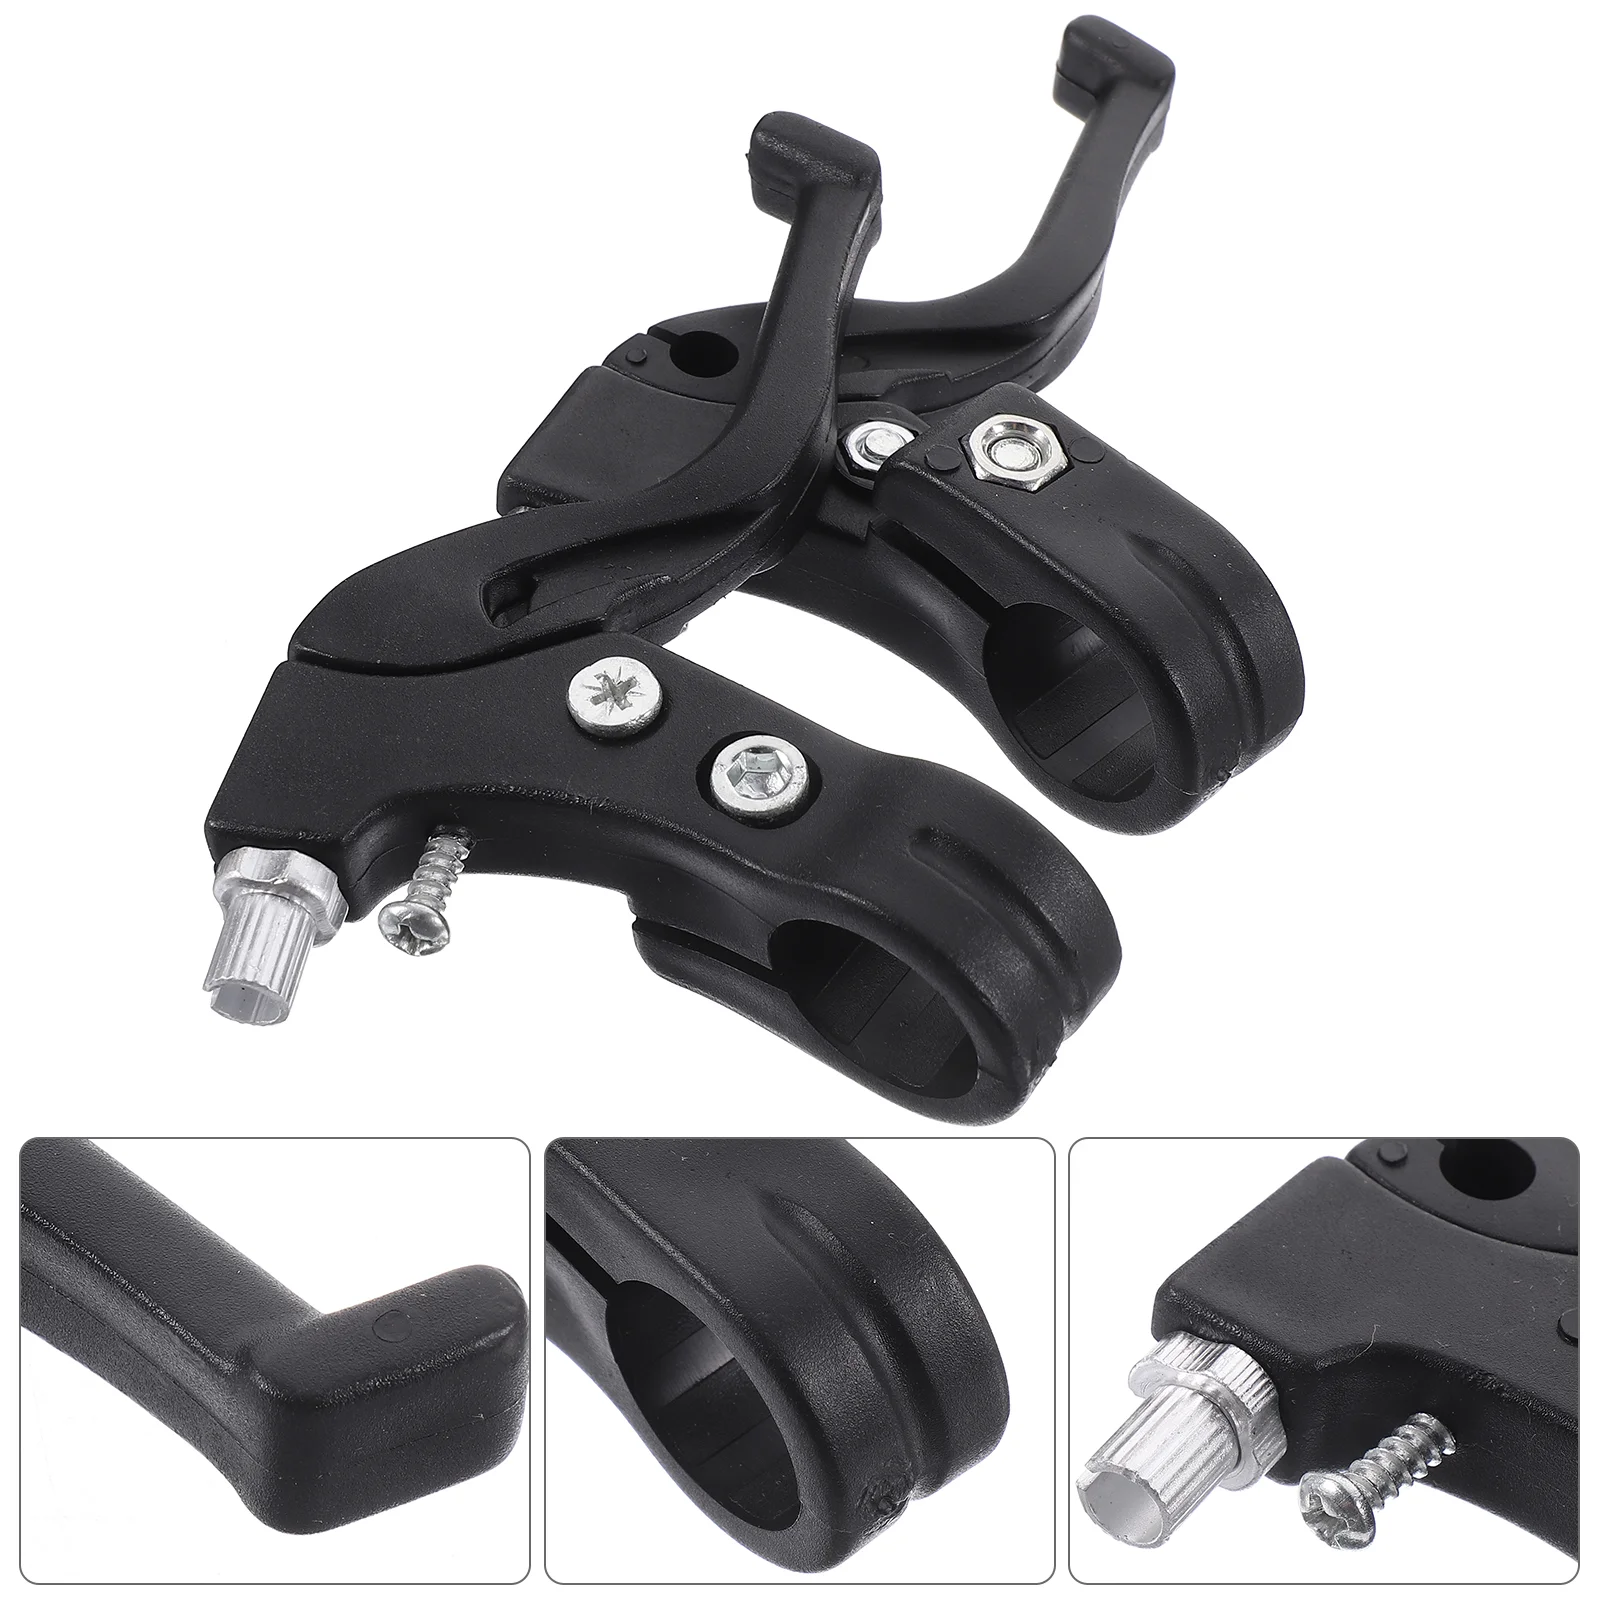 

Brake Lever Bike Levers Handlechildren Hand Brakes Kids Mountain Road For Cycle Cycling Handles Mtb Partsfront Grip